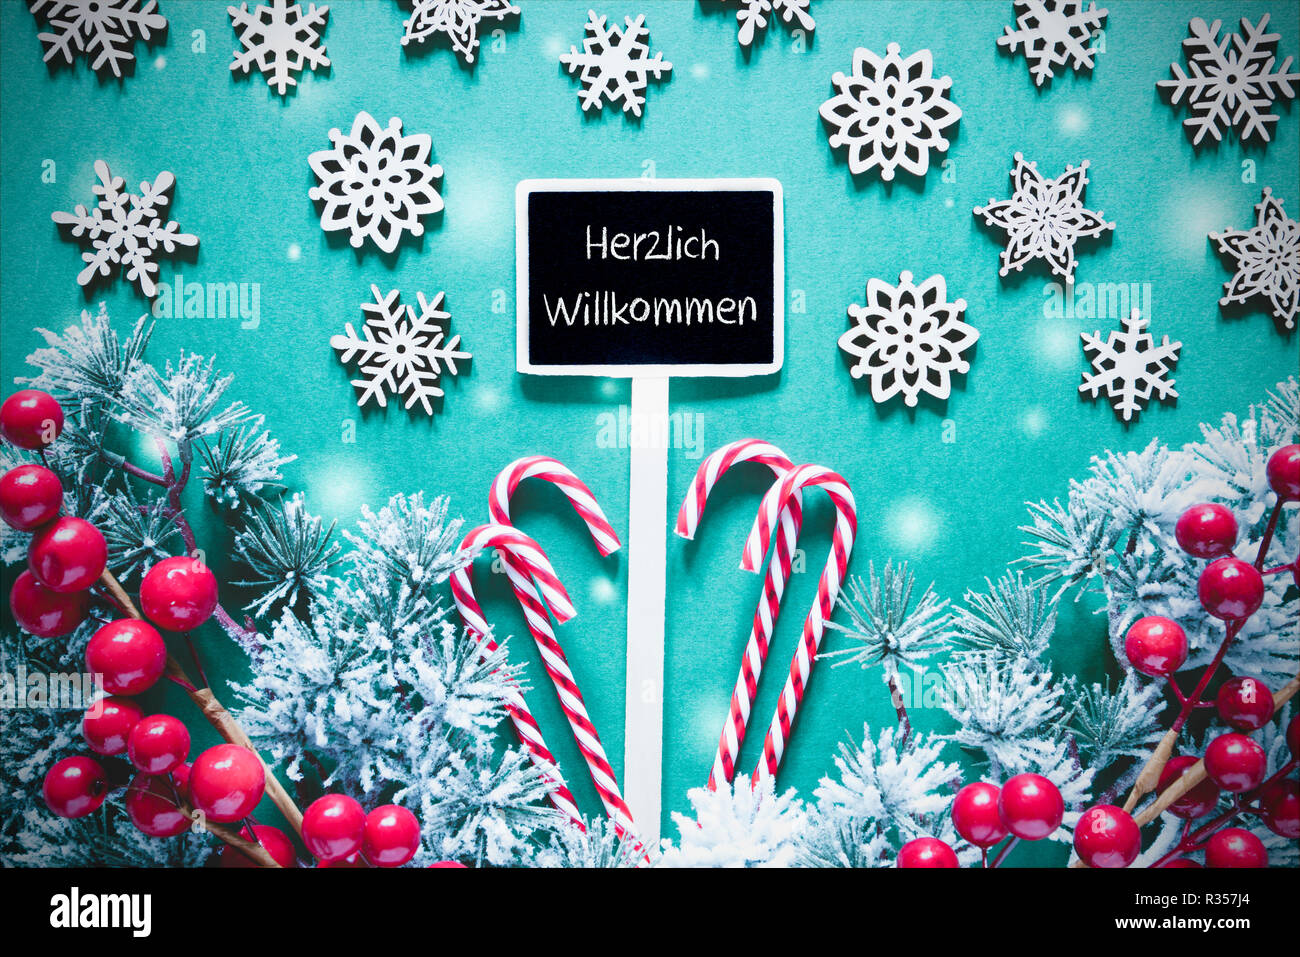 Black Christmas Sign, Lights, Willkommen Means Welcome Stock Photo